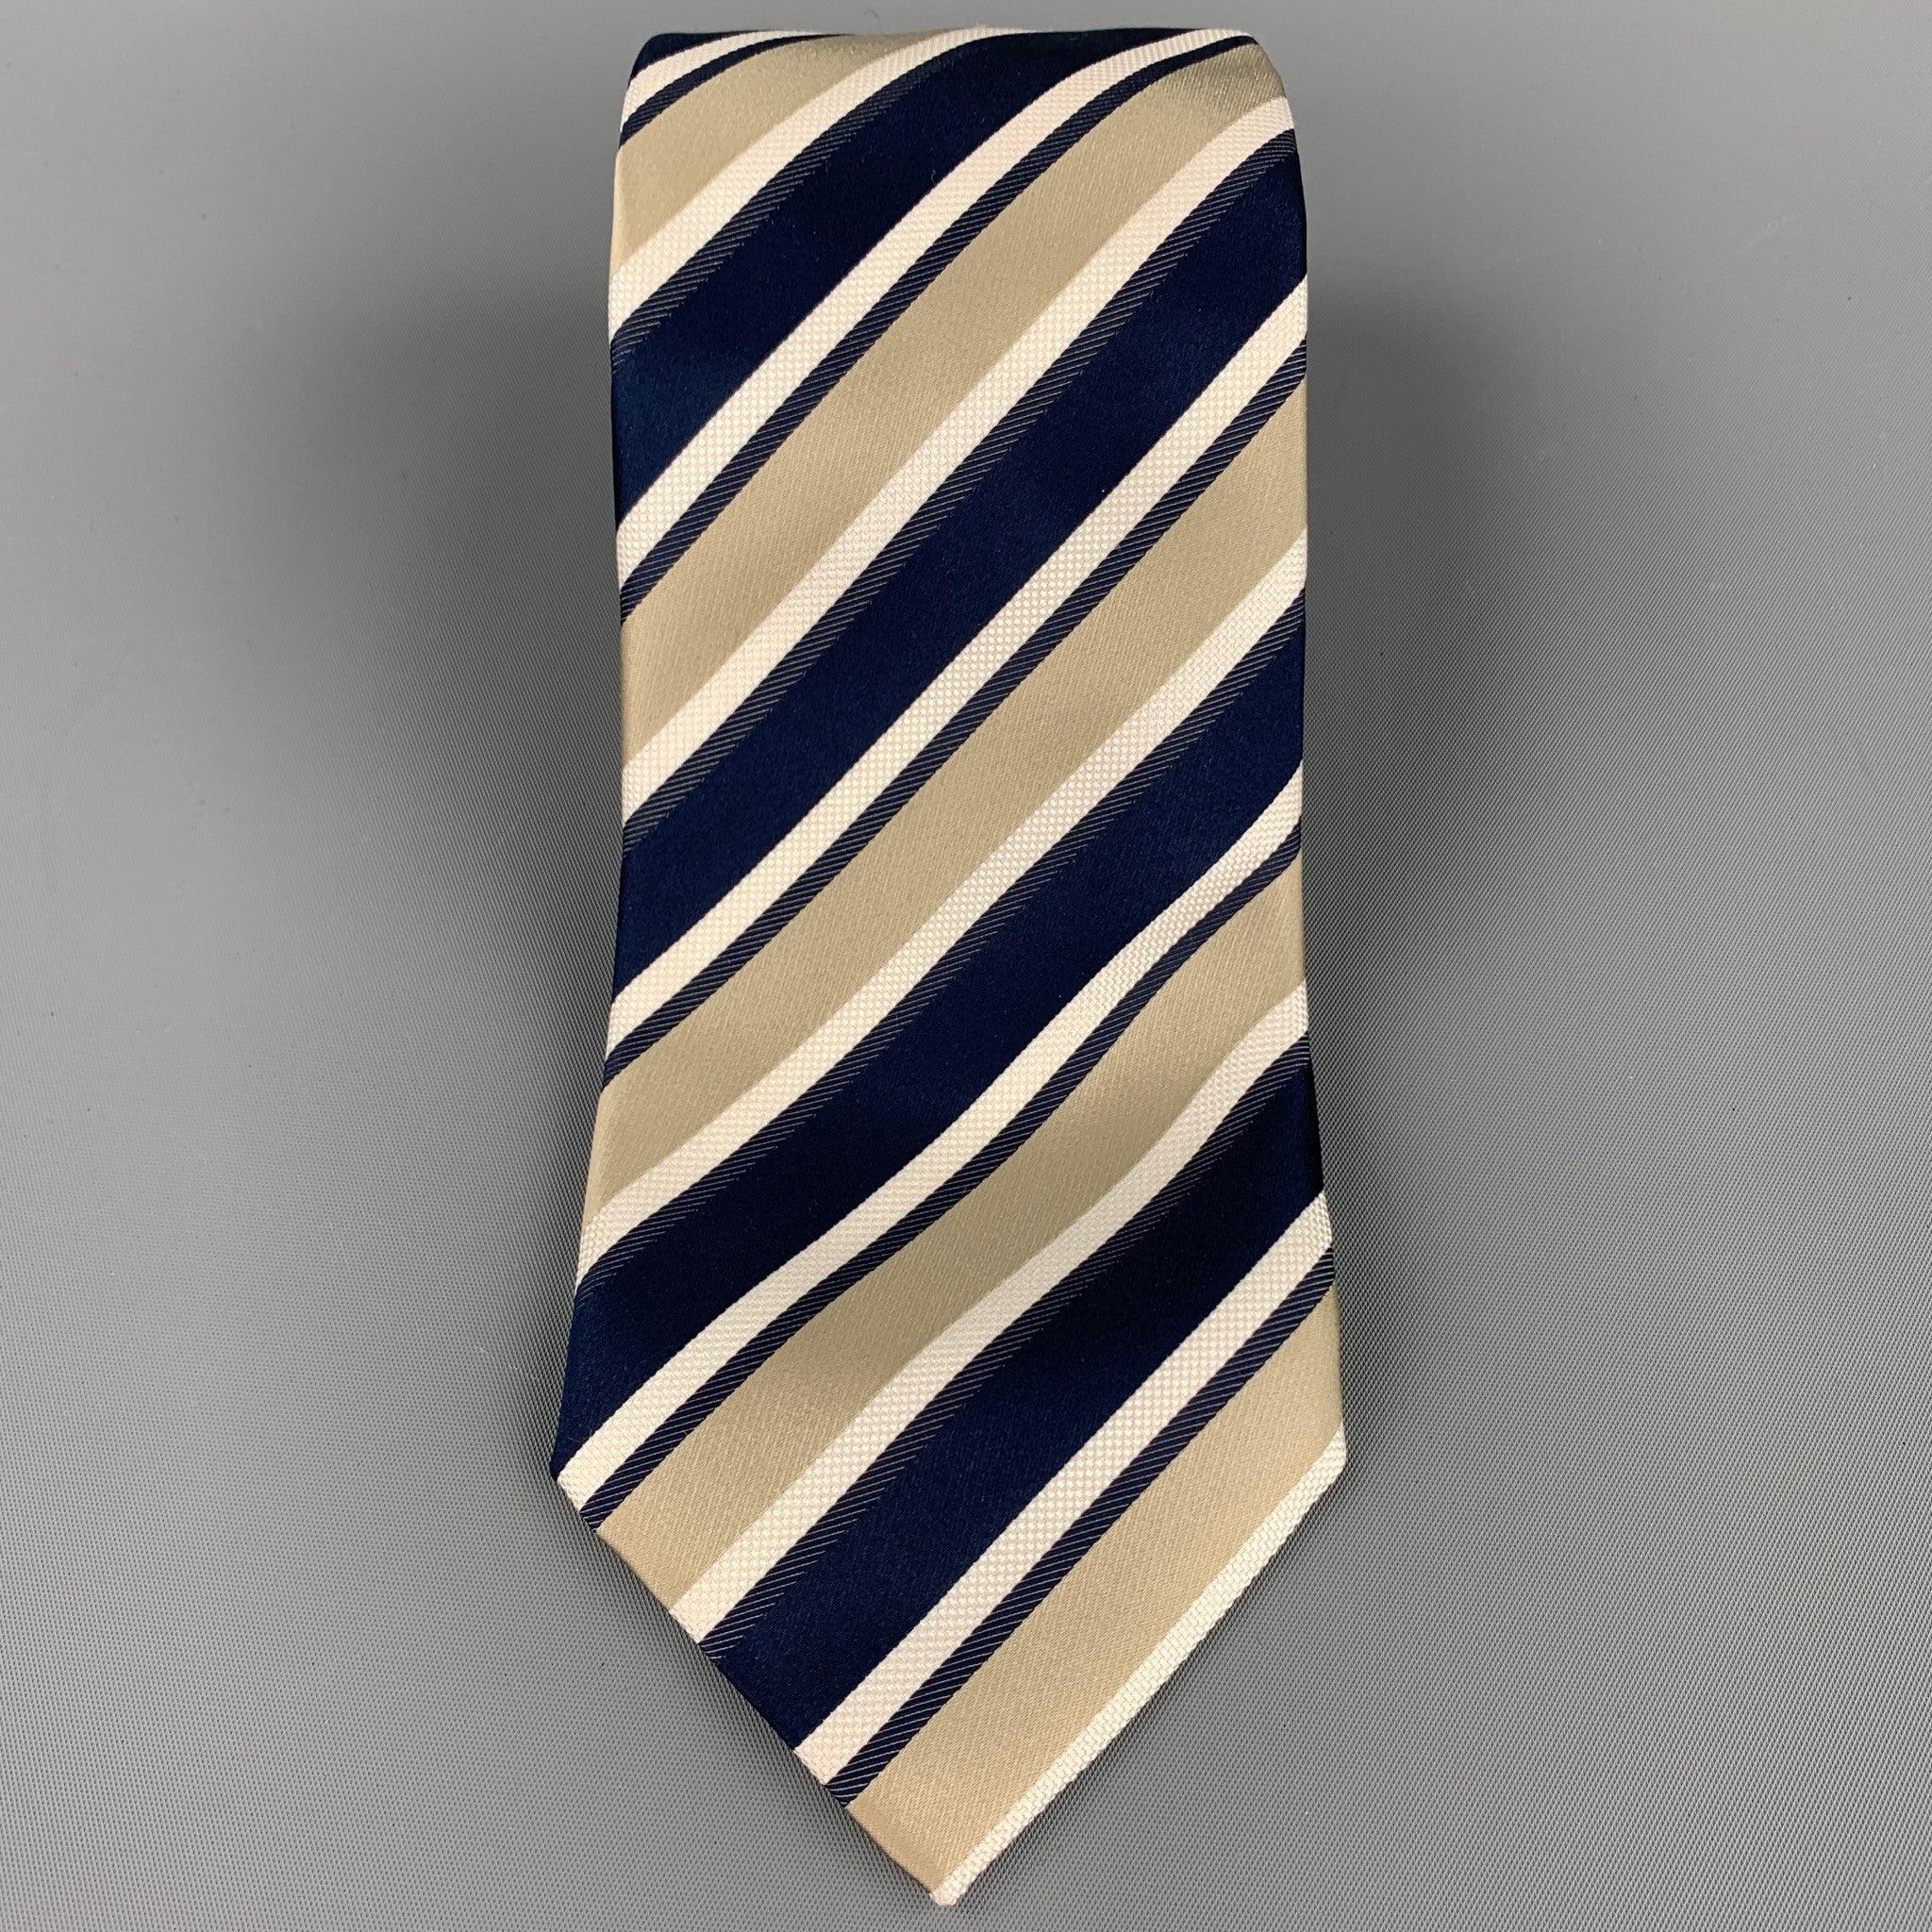 ERMENEGILDO ZEGNA tie comes in a navy & taupe diagonal stripe silk. Made in Italy.Very Good Pre-Owned Condition.Width: 4 inches  
  
  
  
 Sui Generis Reference: 107872
 Category: Tie
 More Details
  
 Brand: ERMENEGILDO ZEGNA
 Color: Navy
 Color